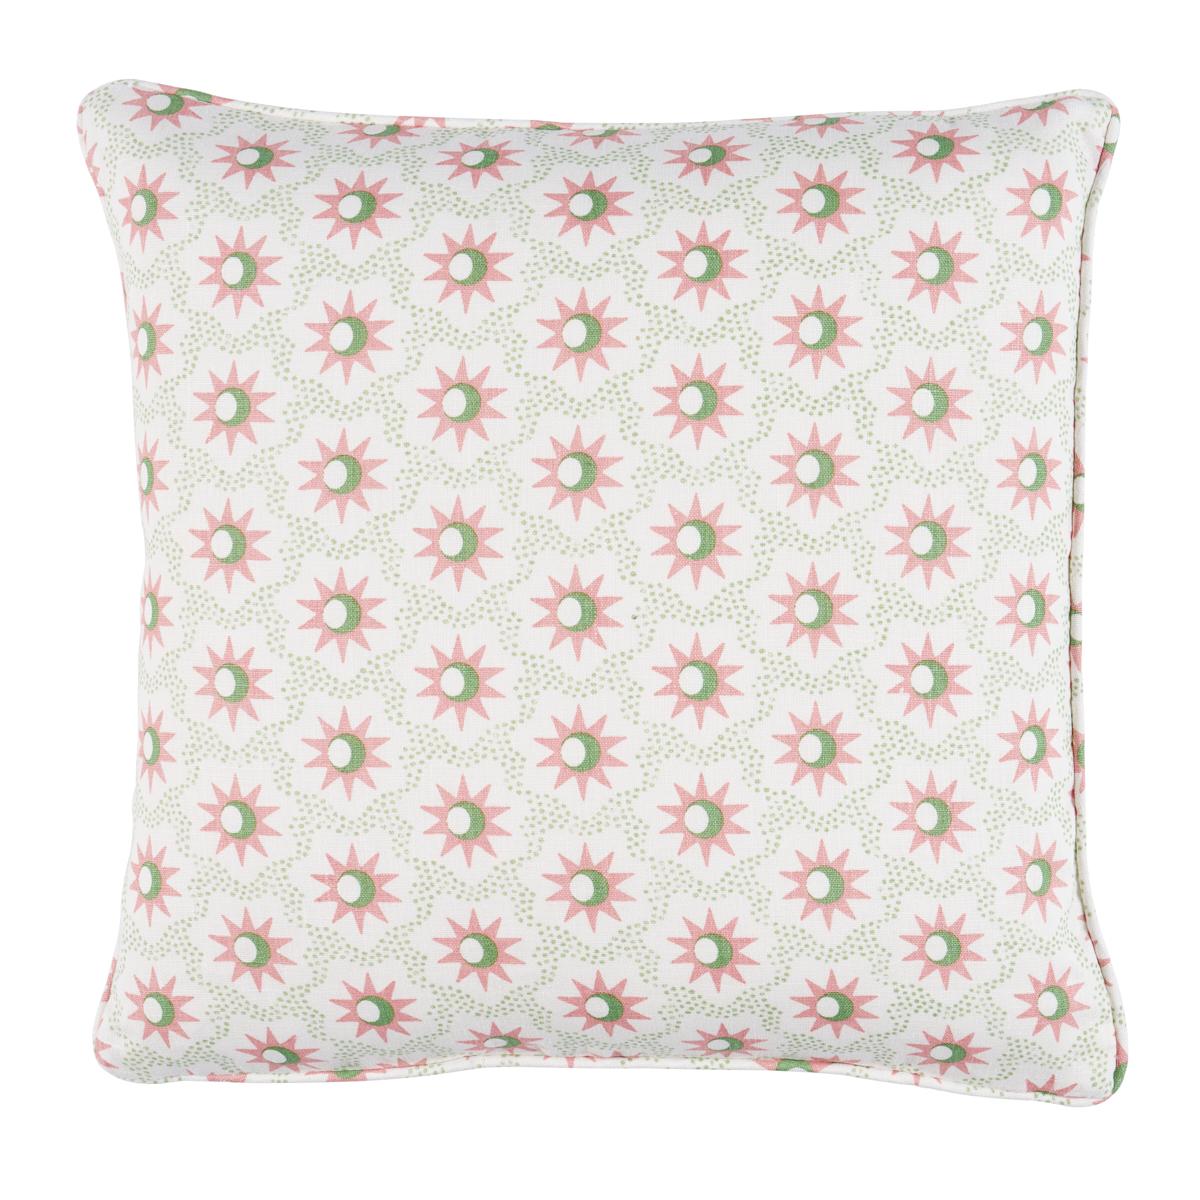 Lucie Pillow in Pink & Green 18 x 18"